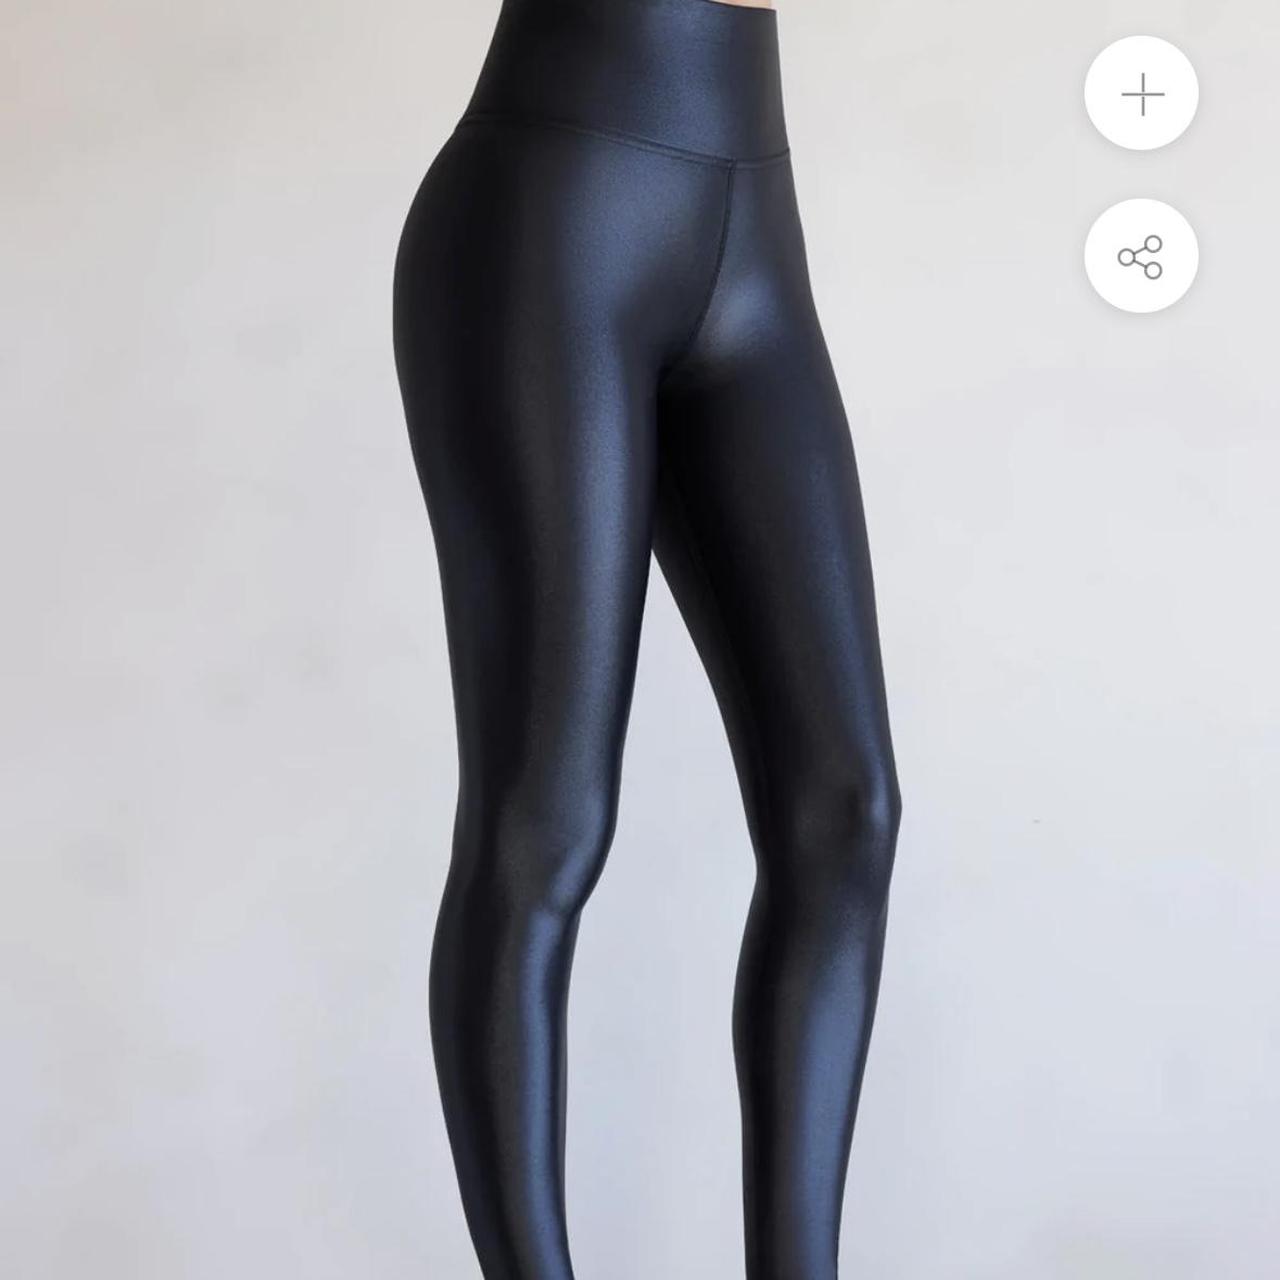 Carbon 38 leggings, like new! No flaws, size small, - Depop